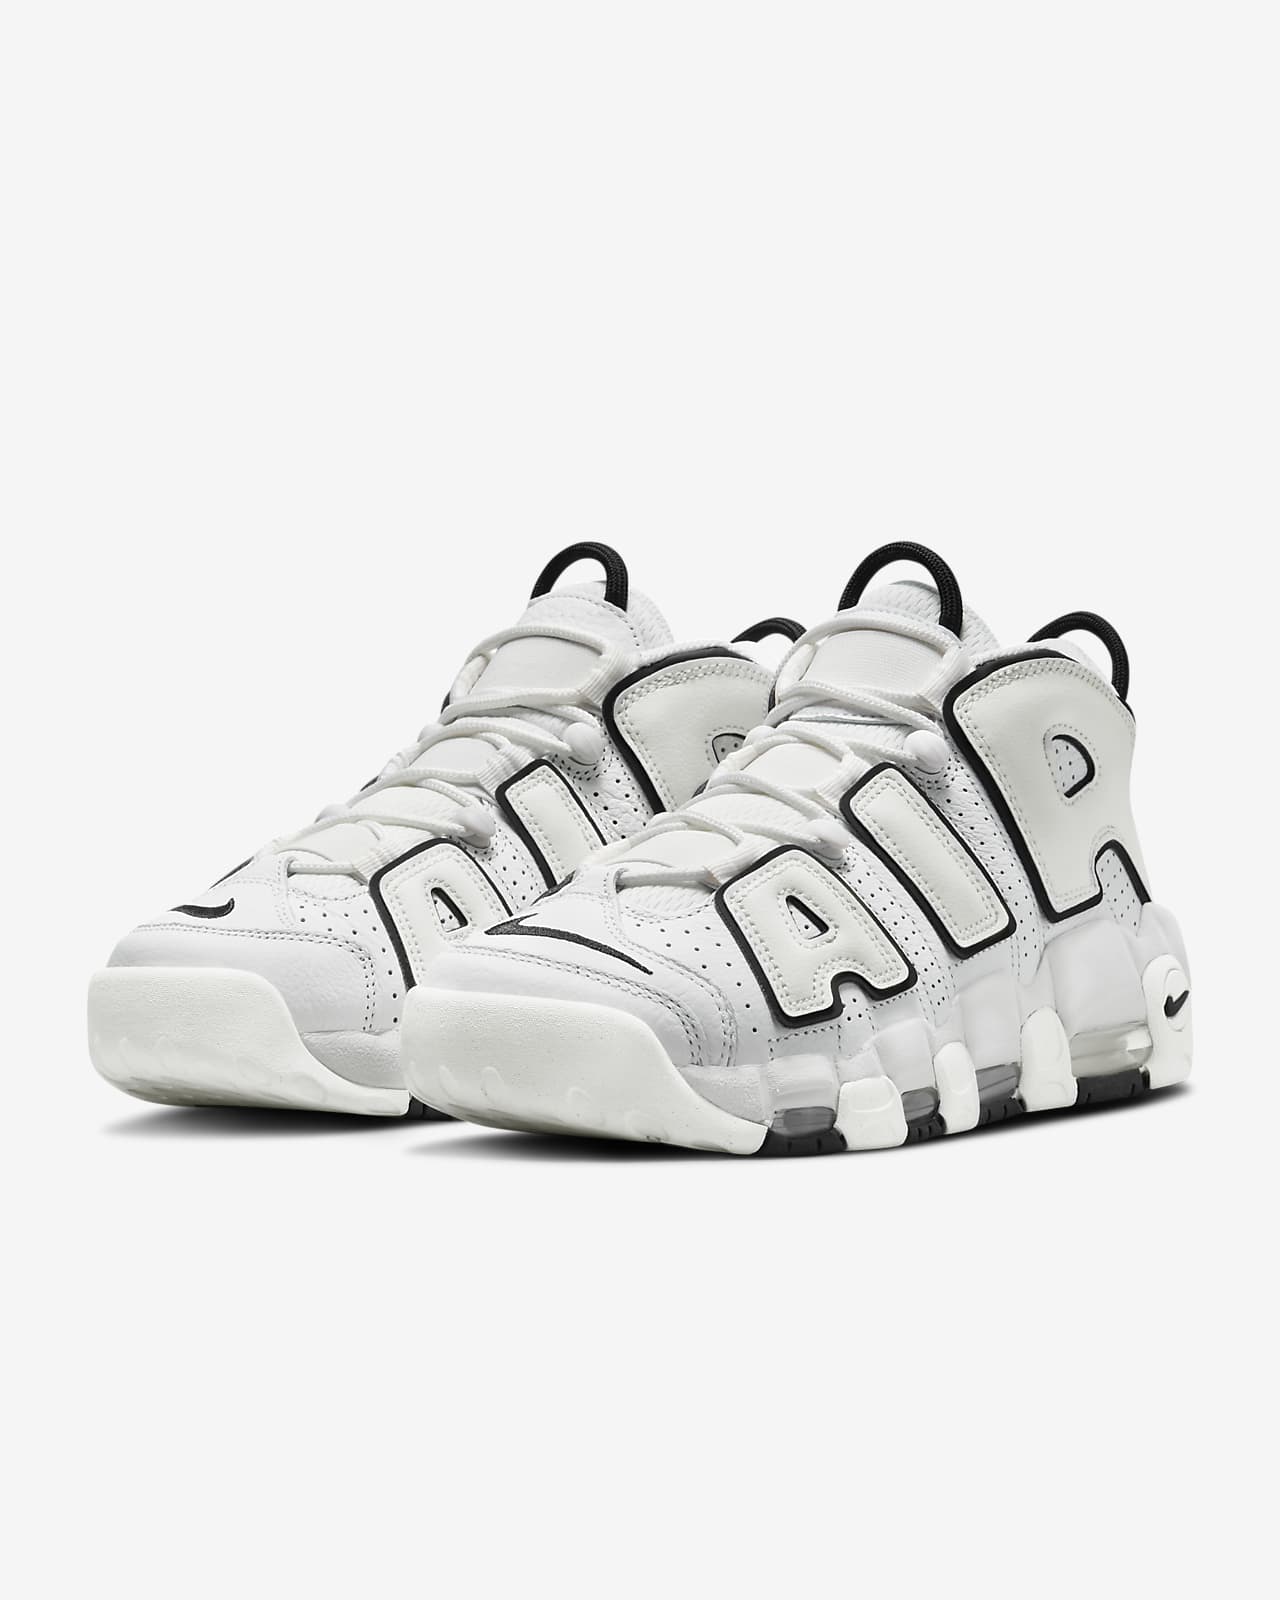 forecast Thereby oven Nike Air More Uptempo Women's Shoes. Nike IL